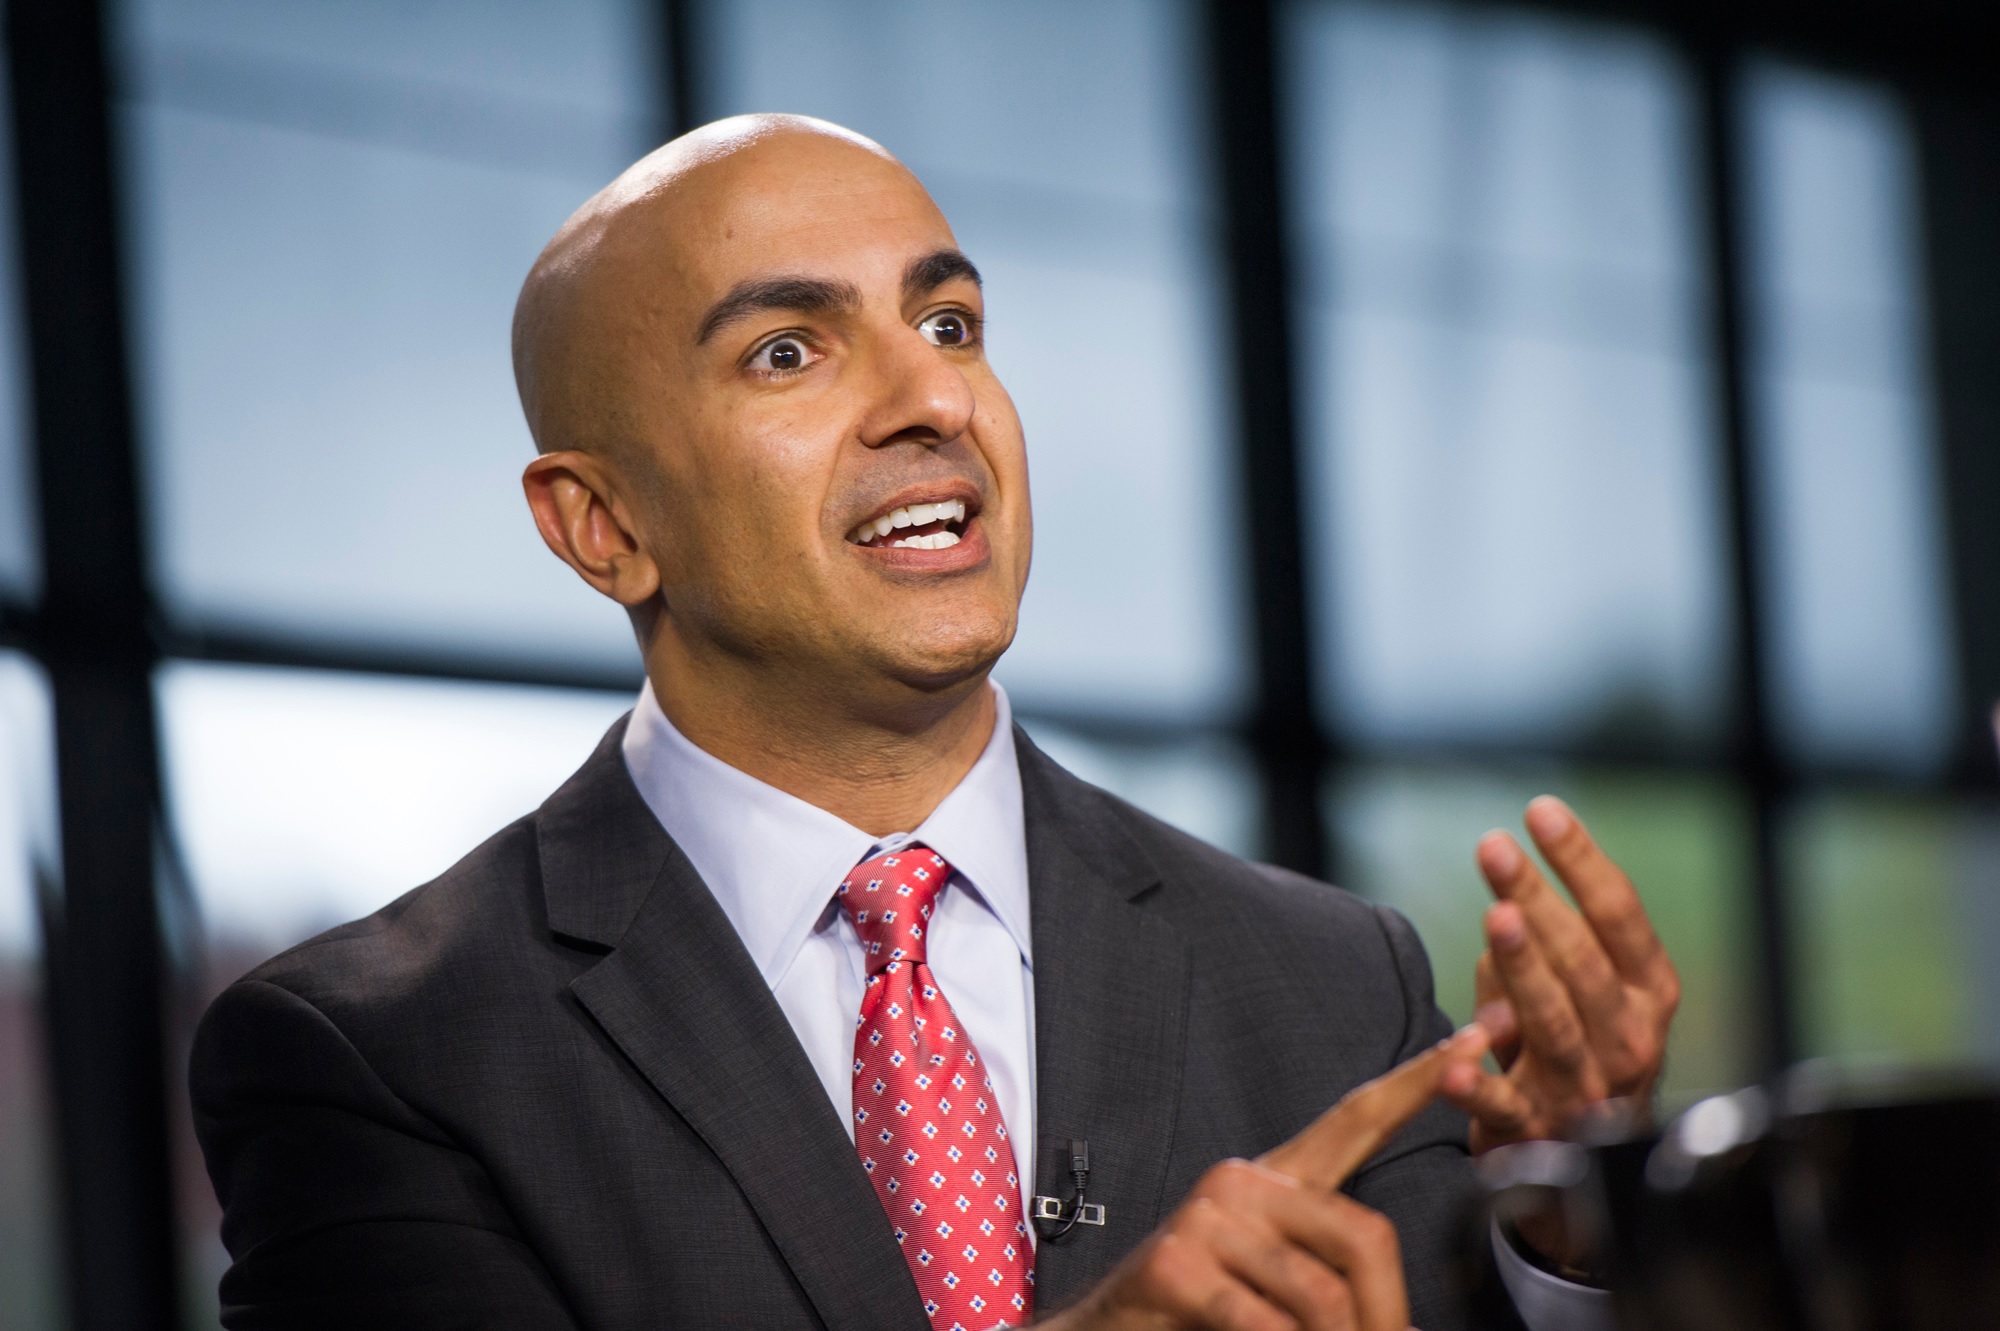 Exclusive FED Rate Comments from Minneapolis Fed President Neel Kashkari: Will There Be a Rate Cut?